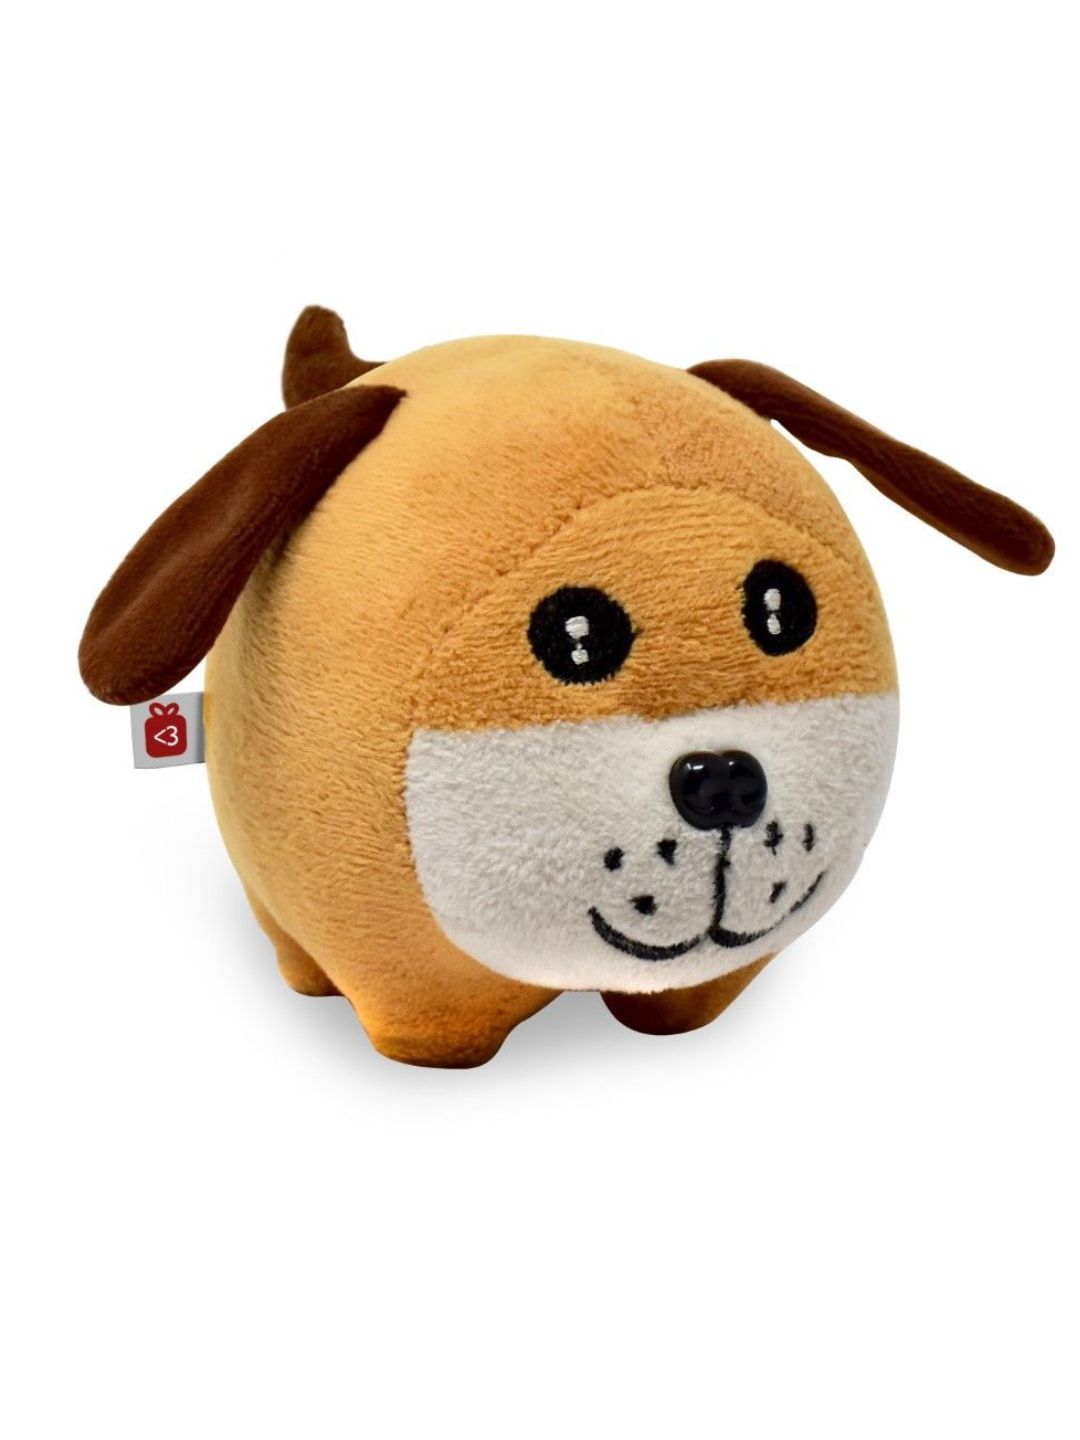 Indigifts Stuffed Soft Toy Puppy for Gift, Cuddle Toy, Stress Buster Gift for Kids, Toys for Kids, Kids Surprise Toy Gift